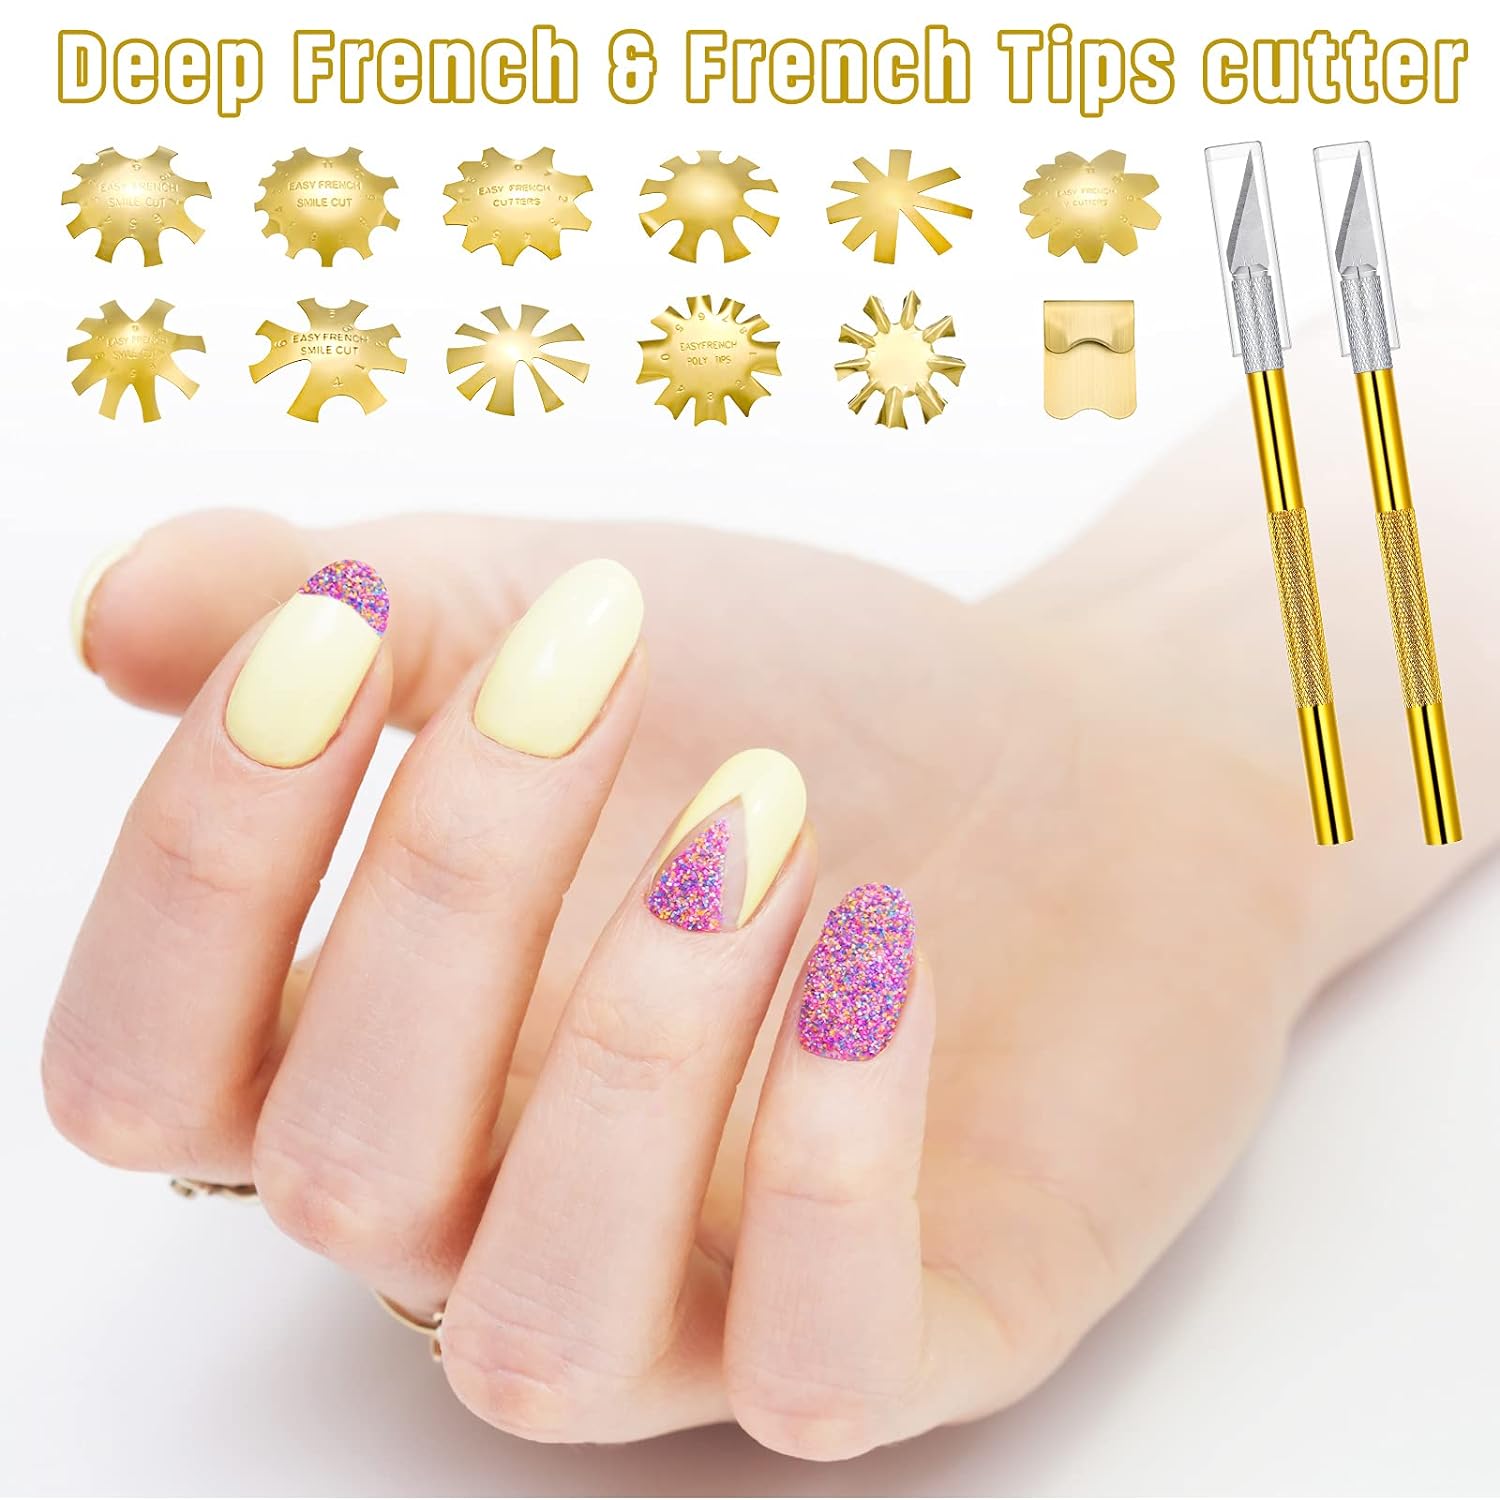 19Pcs French Nail Trimmer Set with Cutting Knife and Spare Blades